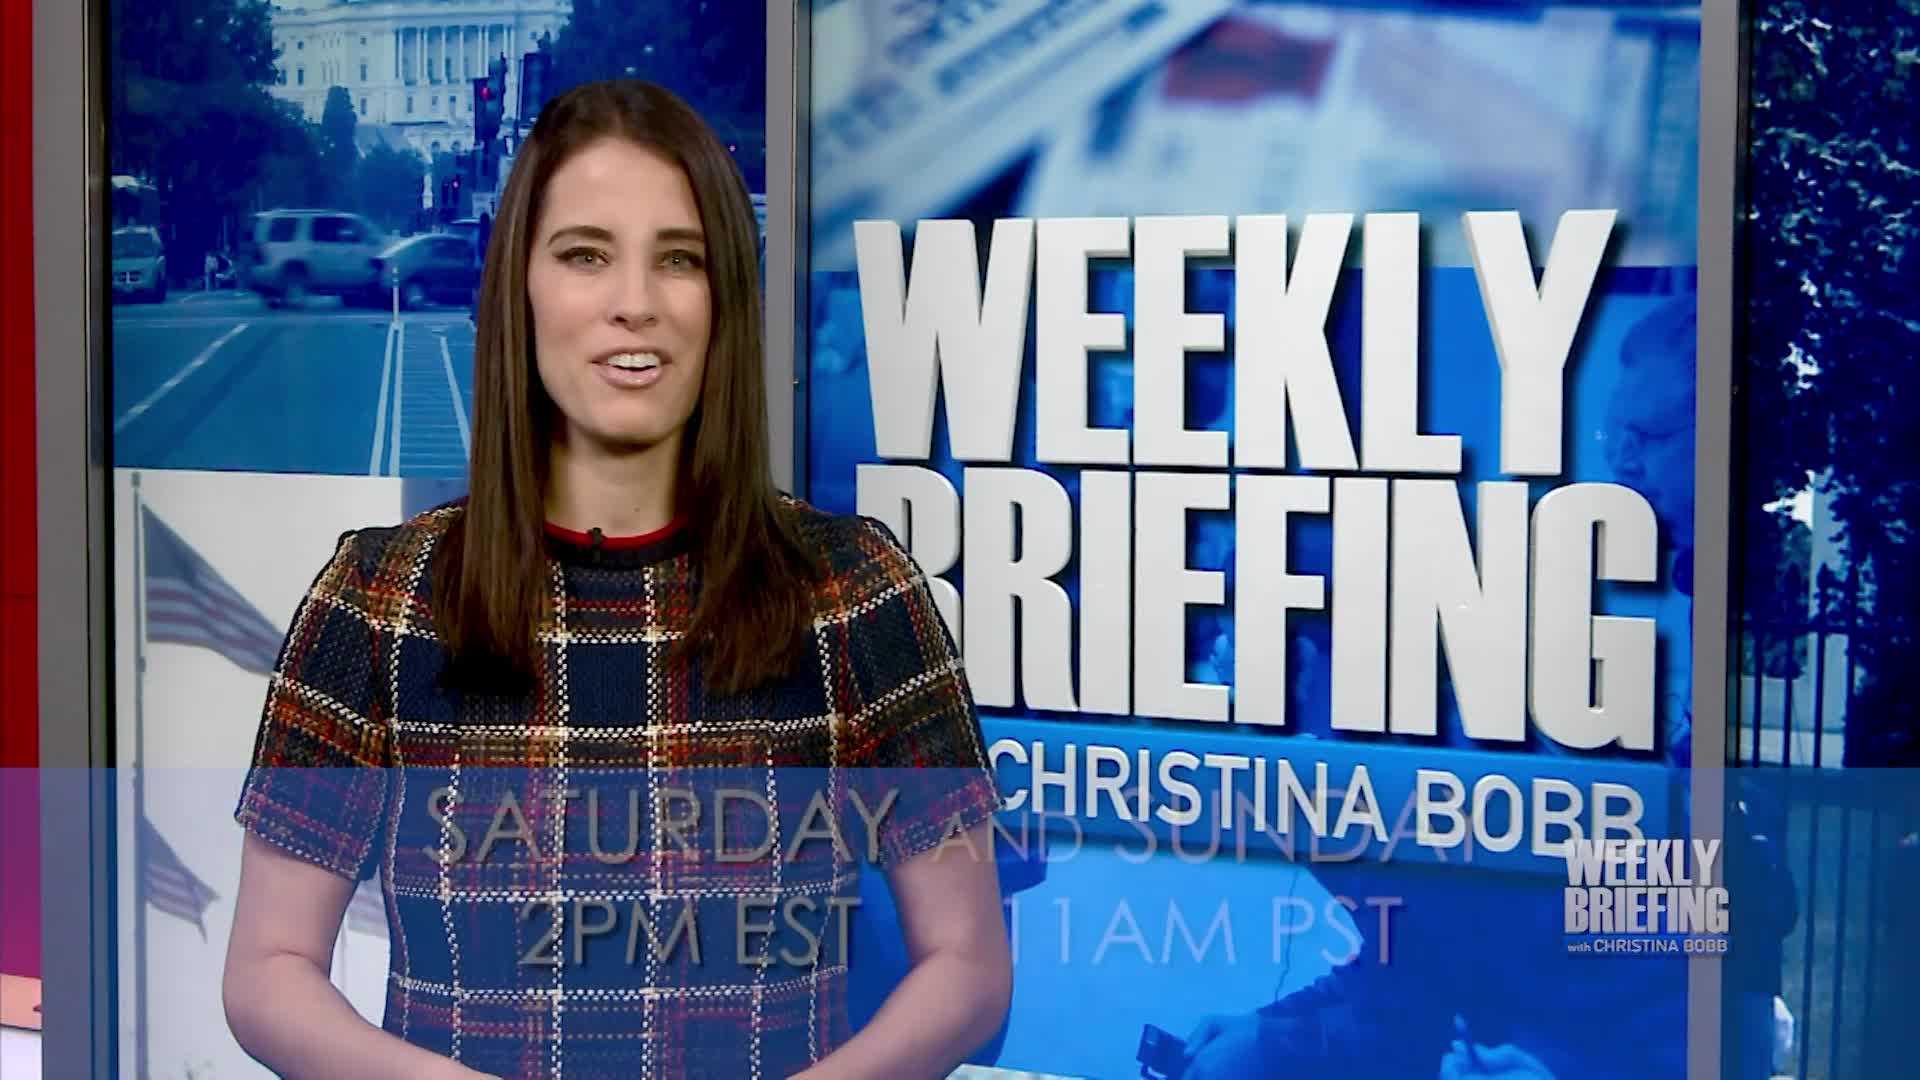 Weekly Briefing with Christina Bobb.